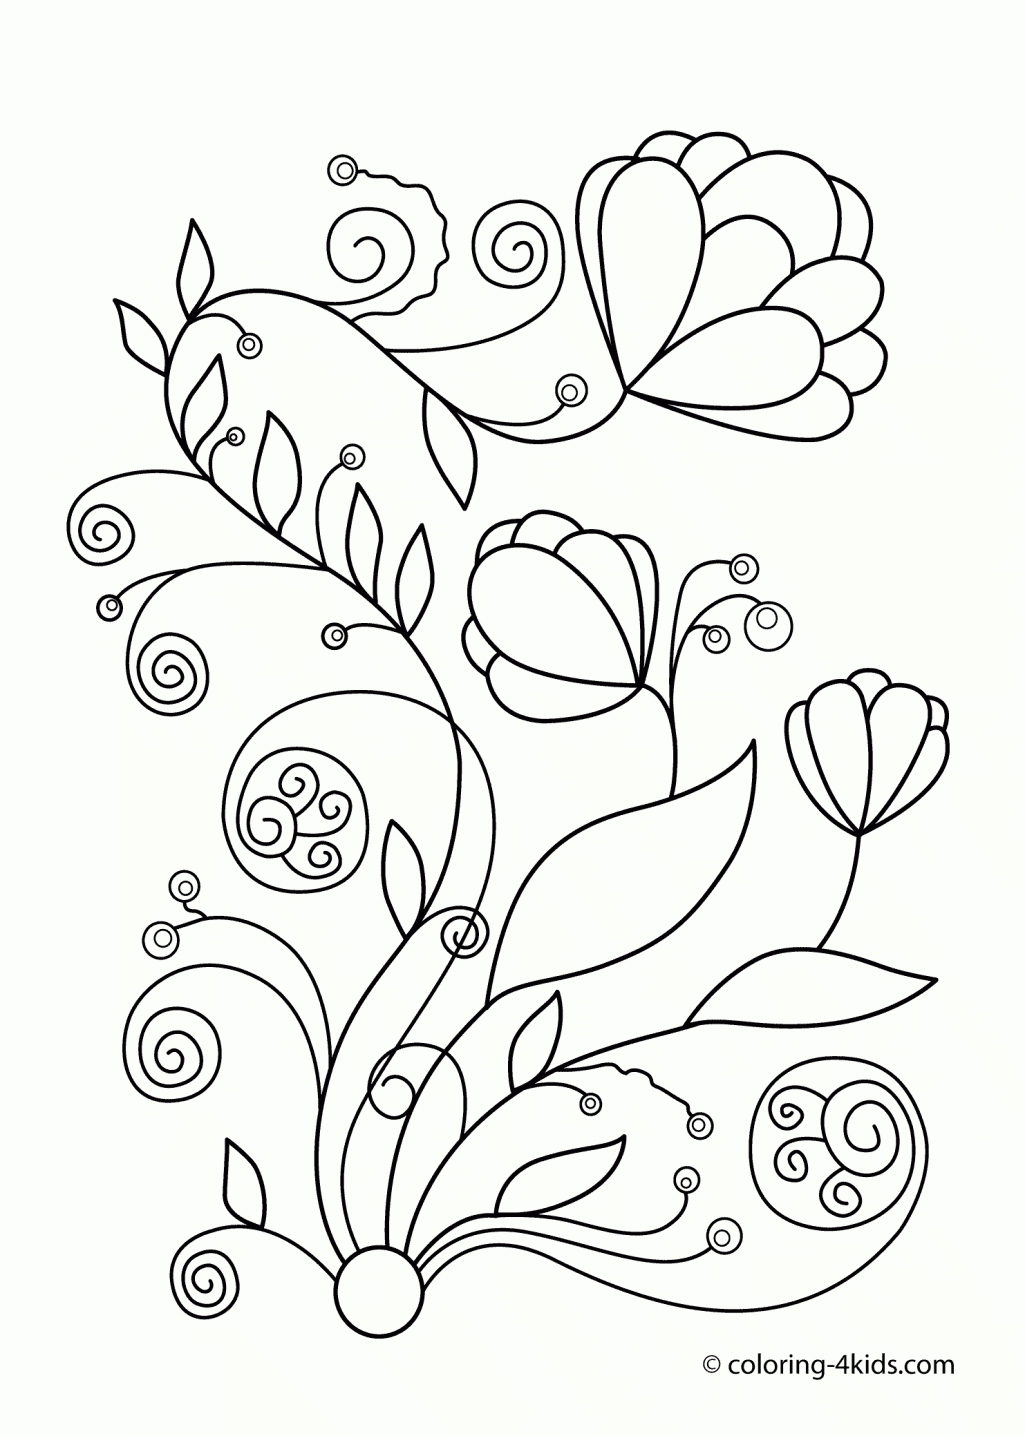 Free Printable Spring Coloring Pages For Adults - Coloring Home - Free Printable Spring Coloring Pages For Adults